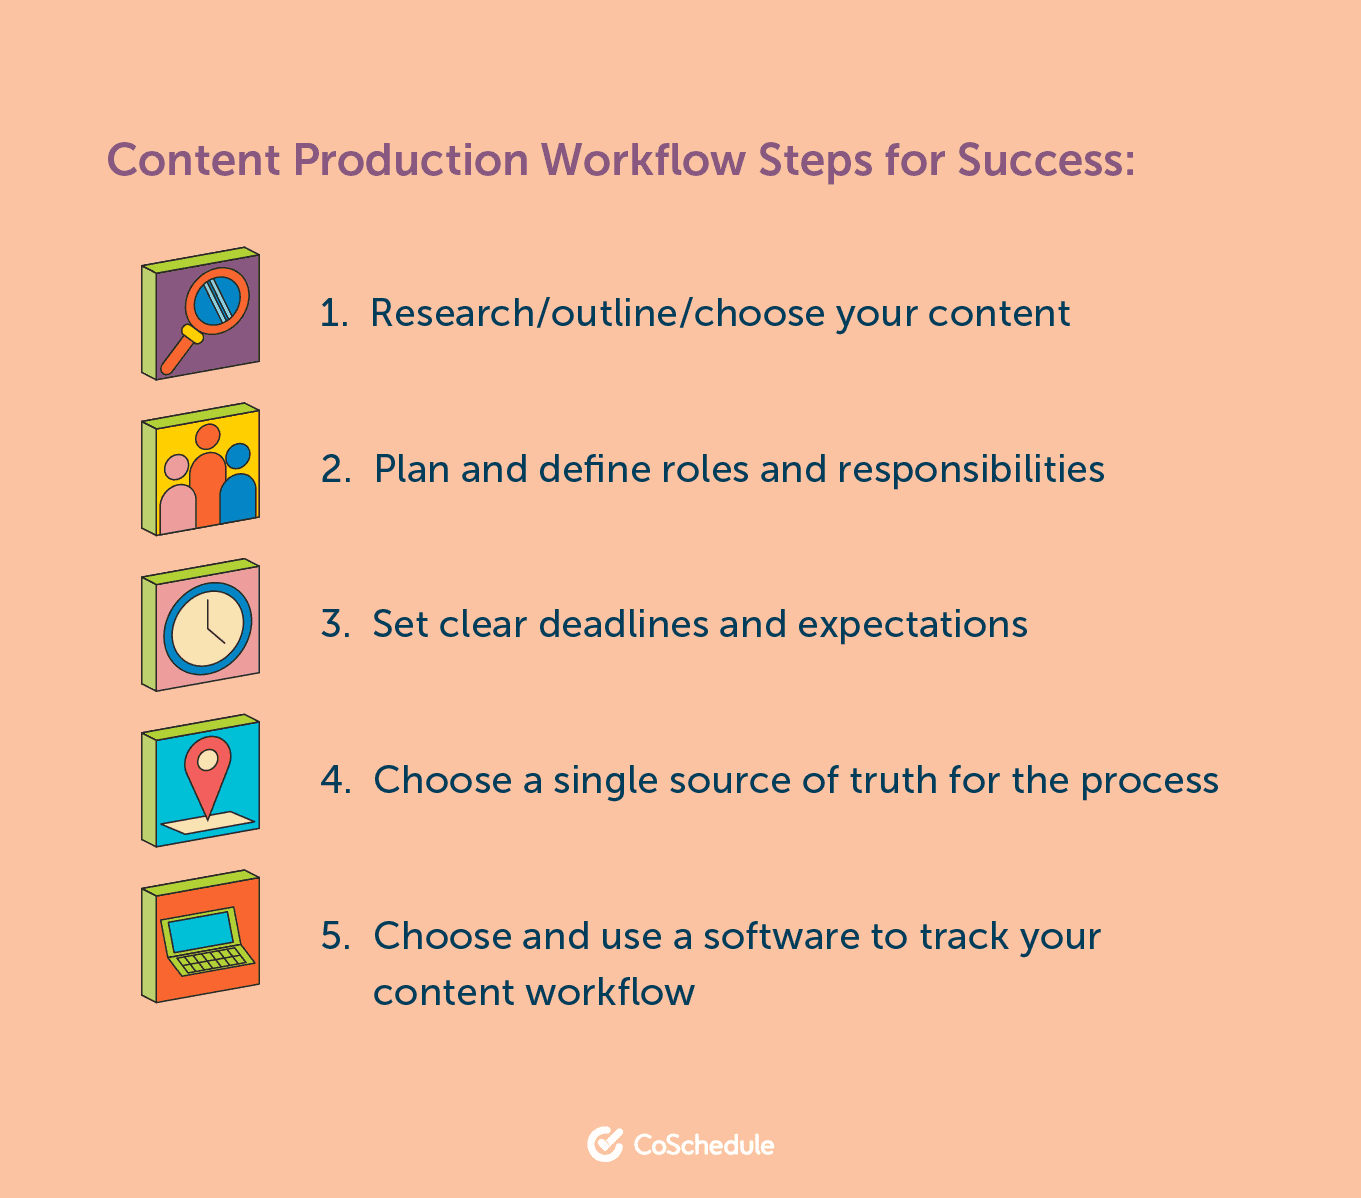 Content production workflow steps